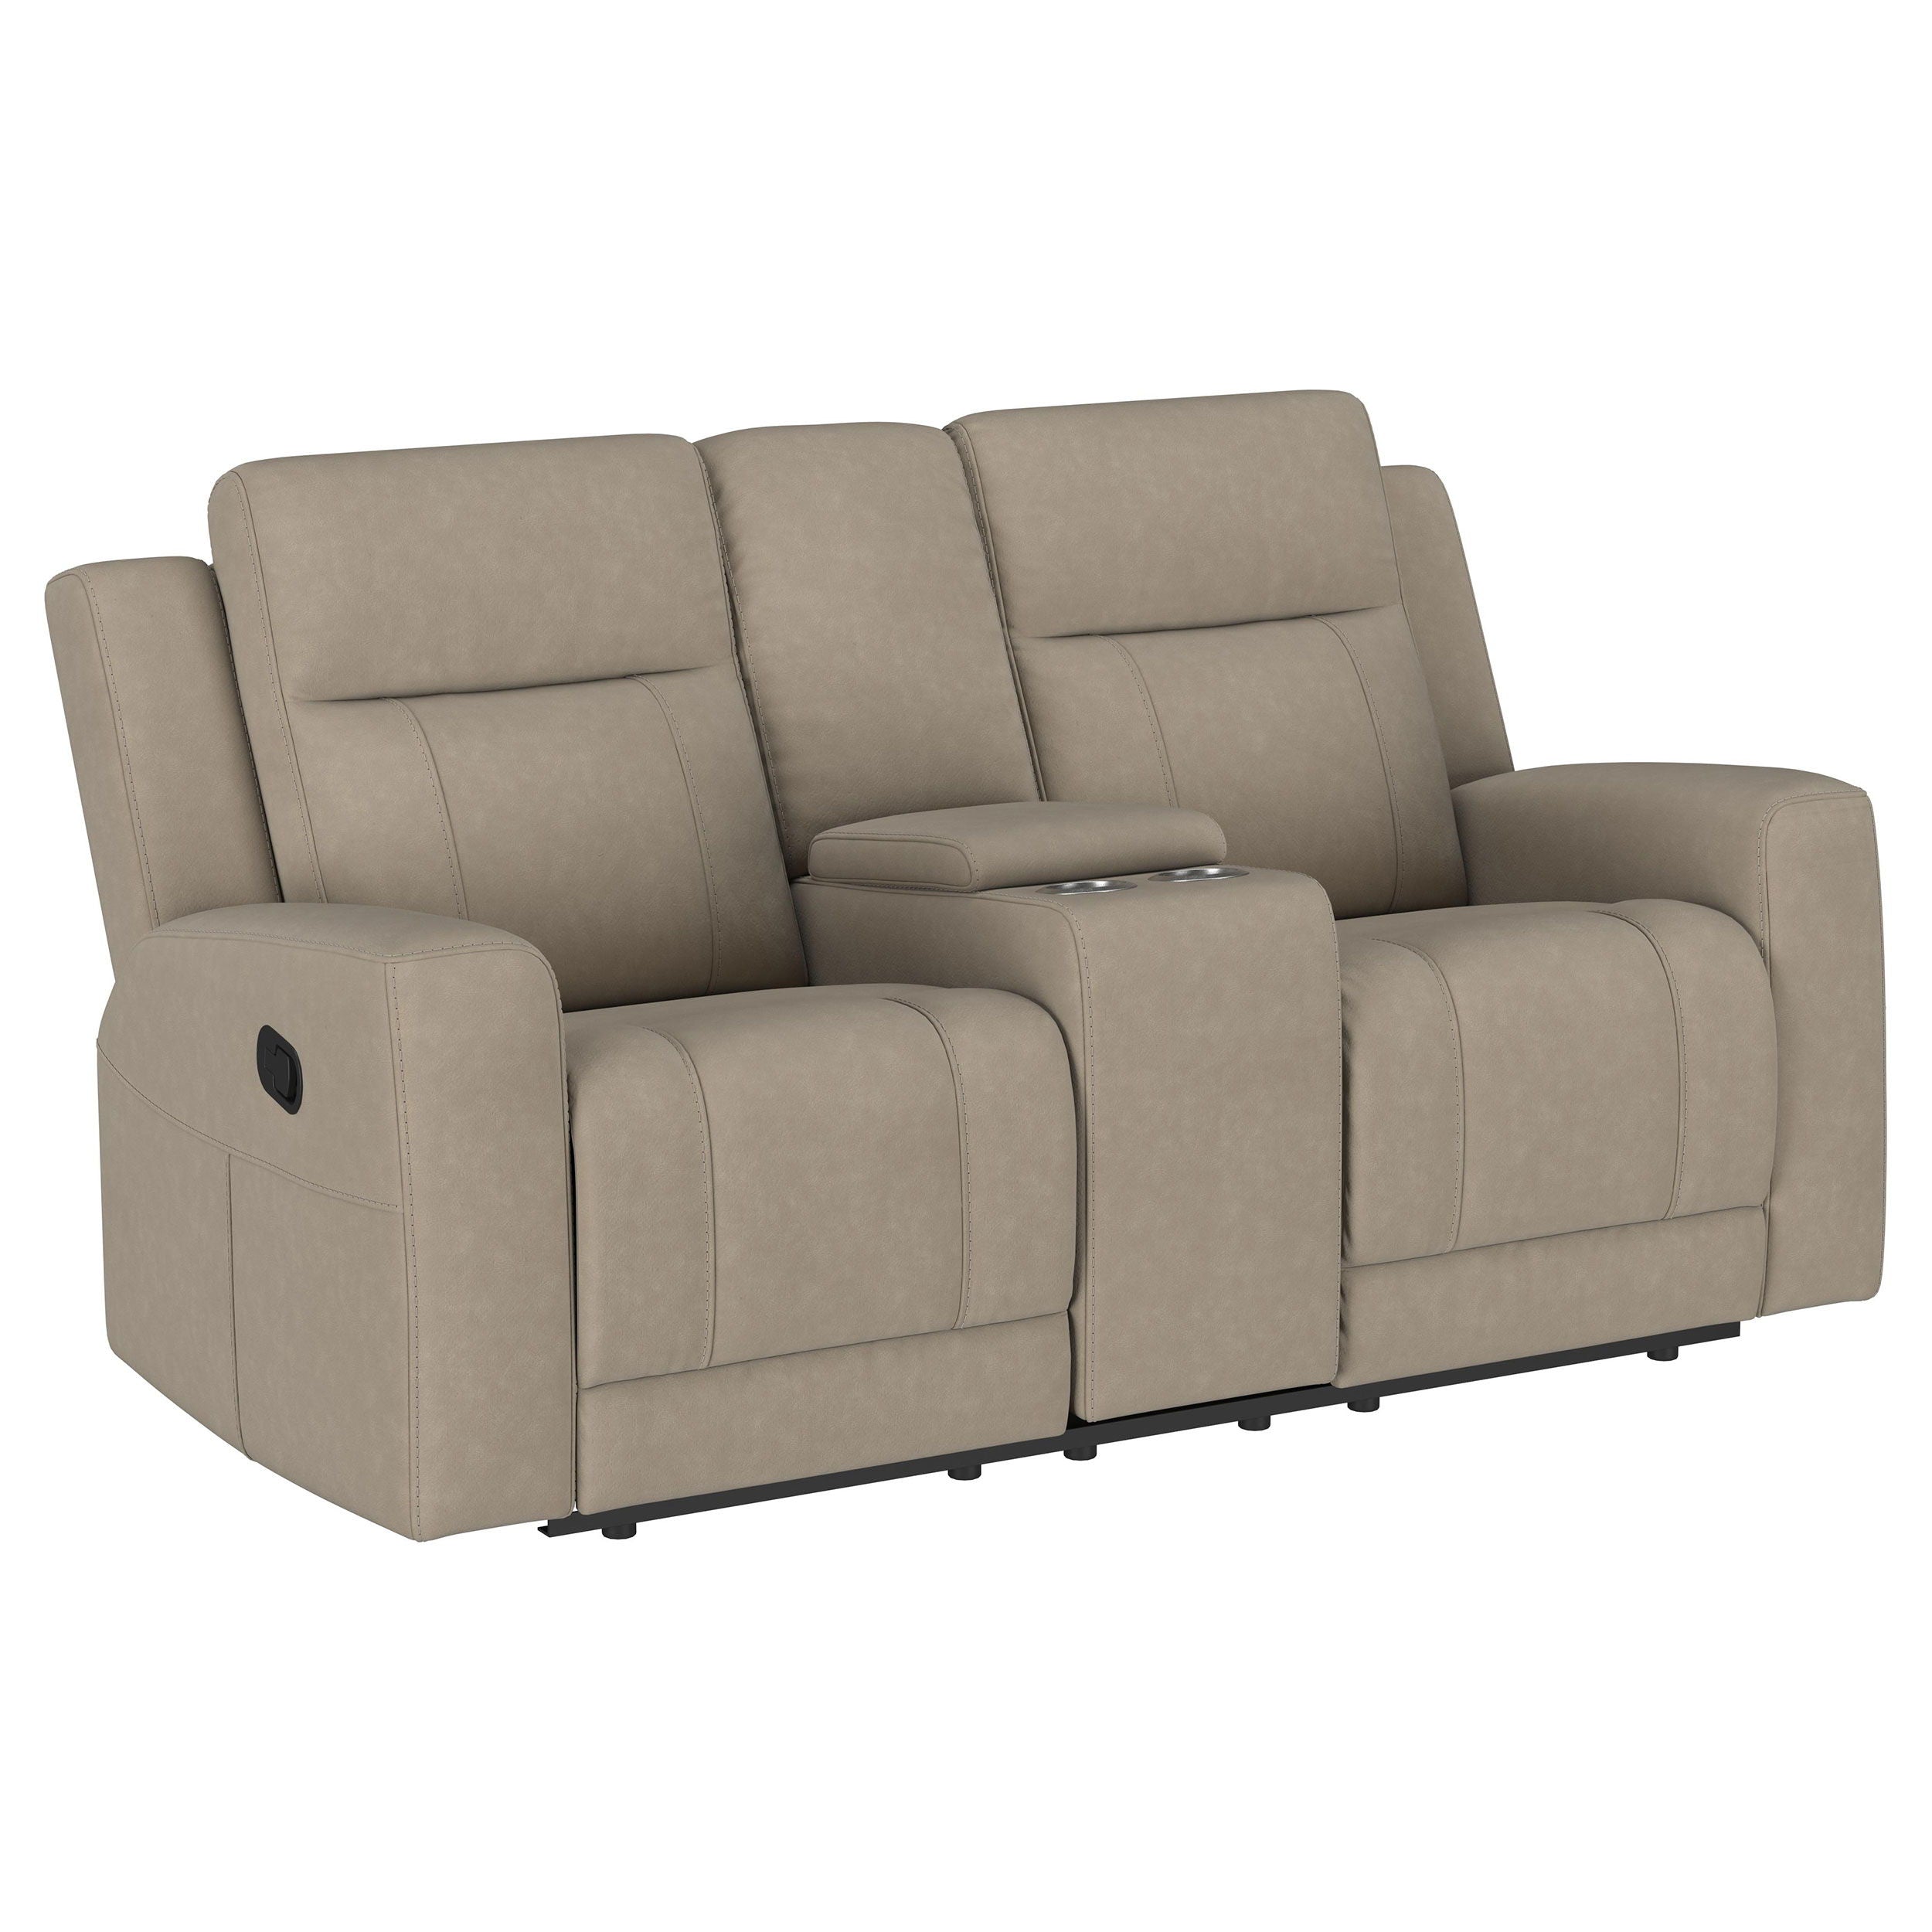 Coaster Fine Furniture - Brentwood - Upholstered Motion Reclining Loveseat With Console - Taupe - 5th Avenue Furniture